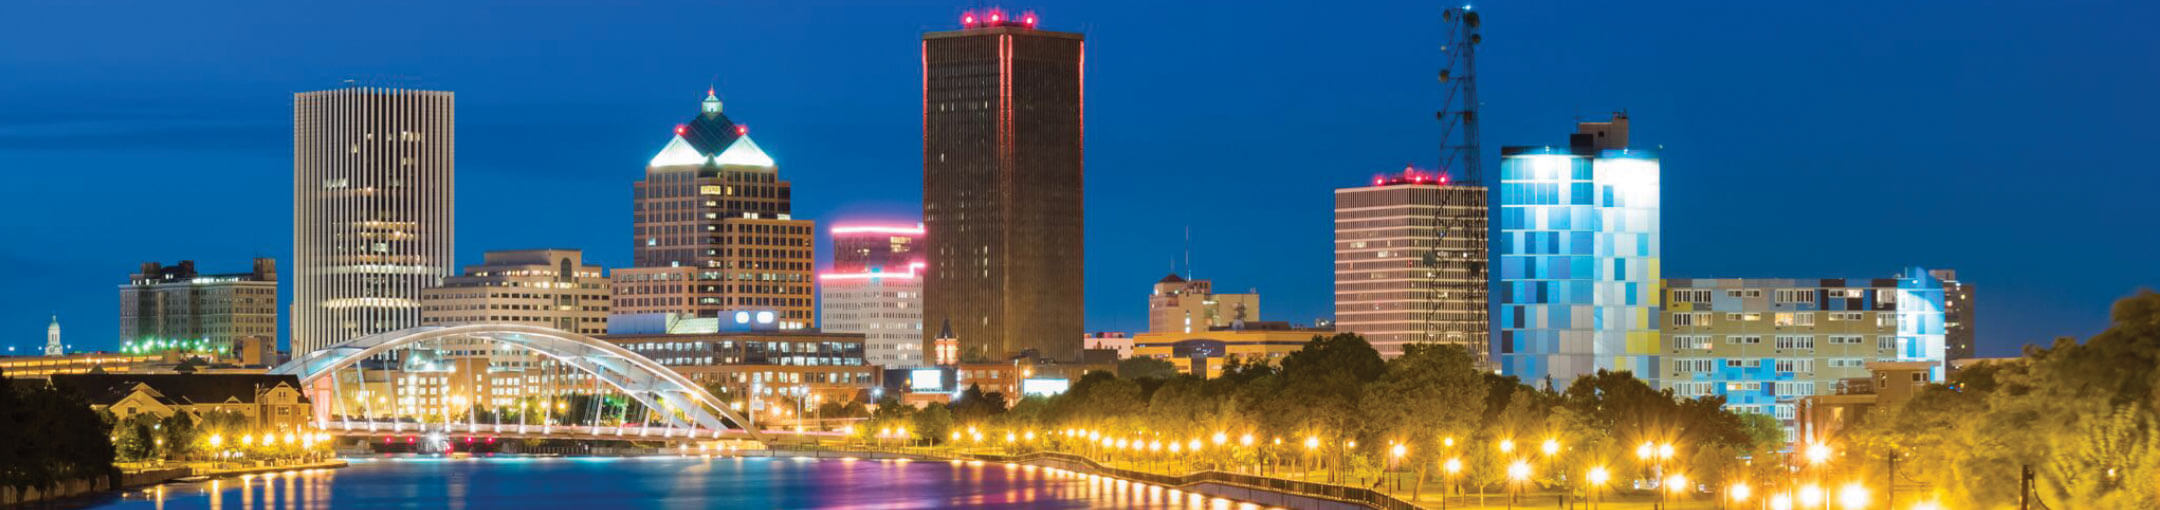 A view of the Rochester City skyline at dusk.